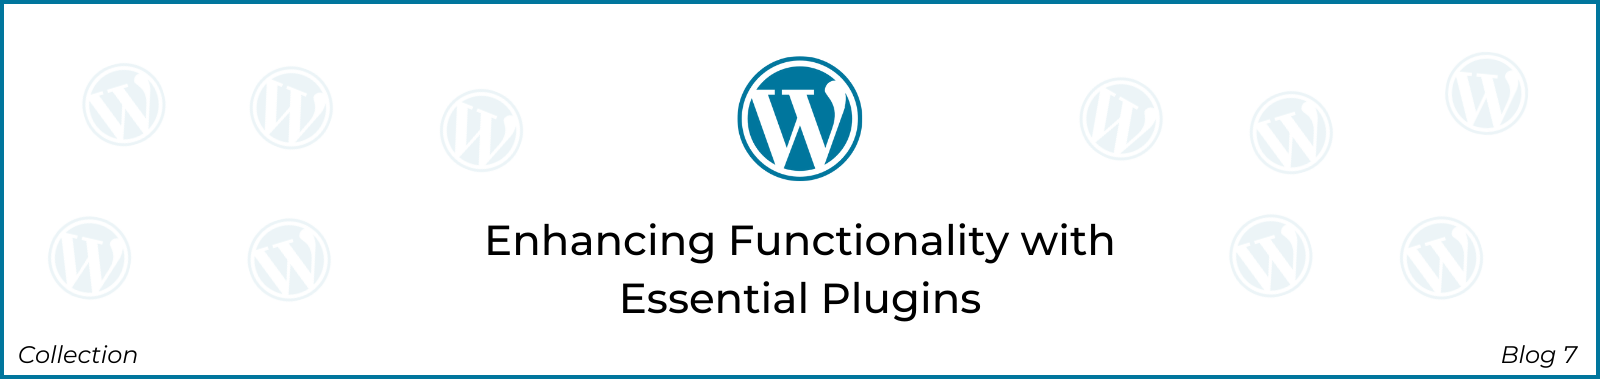 Enhancing Functionality with Essential Plugins